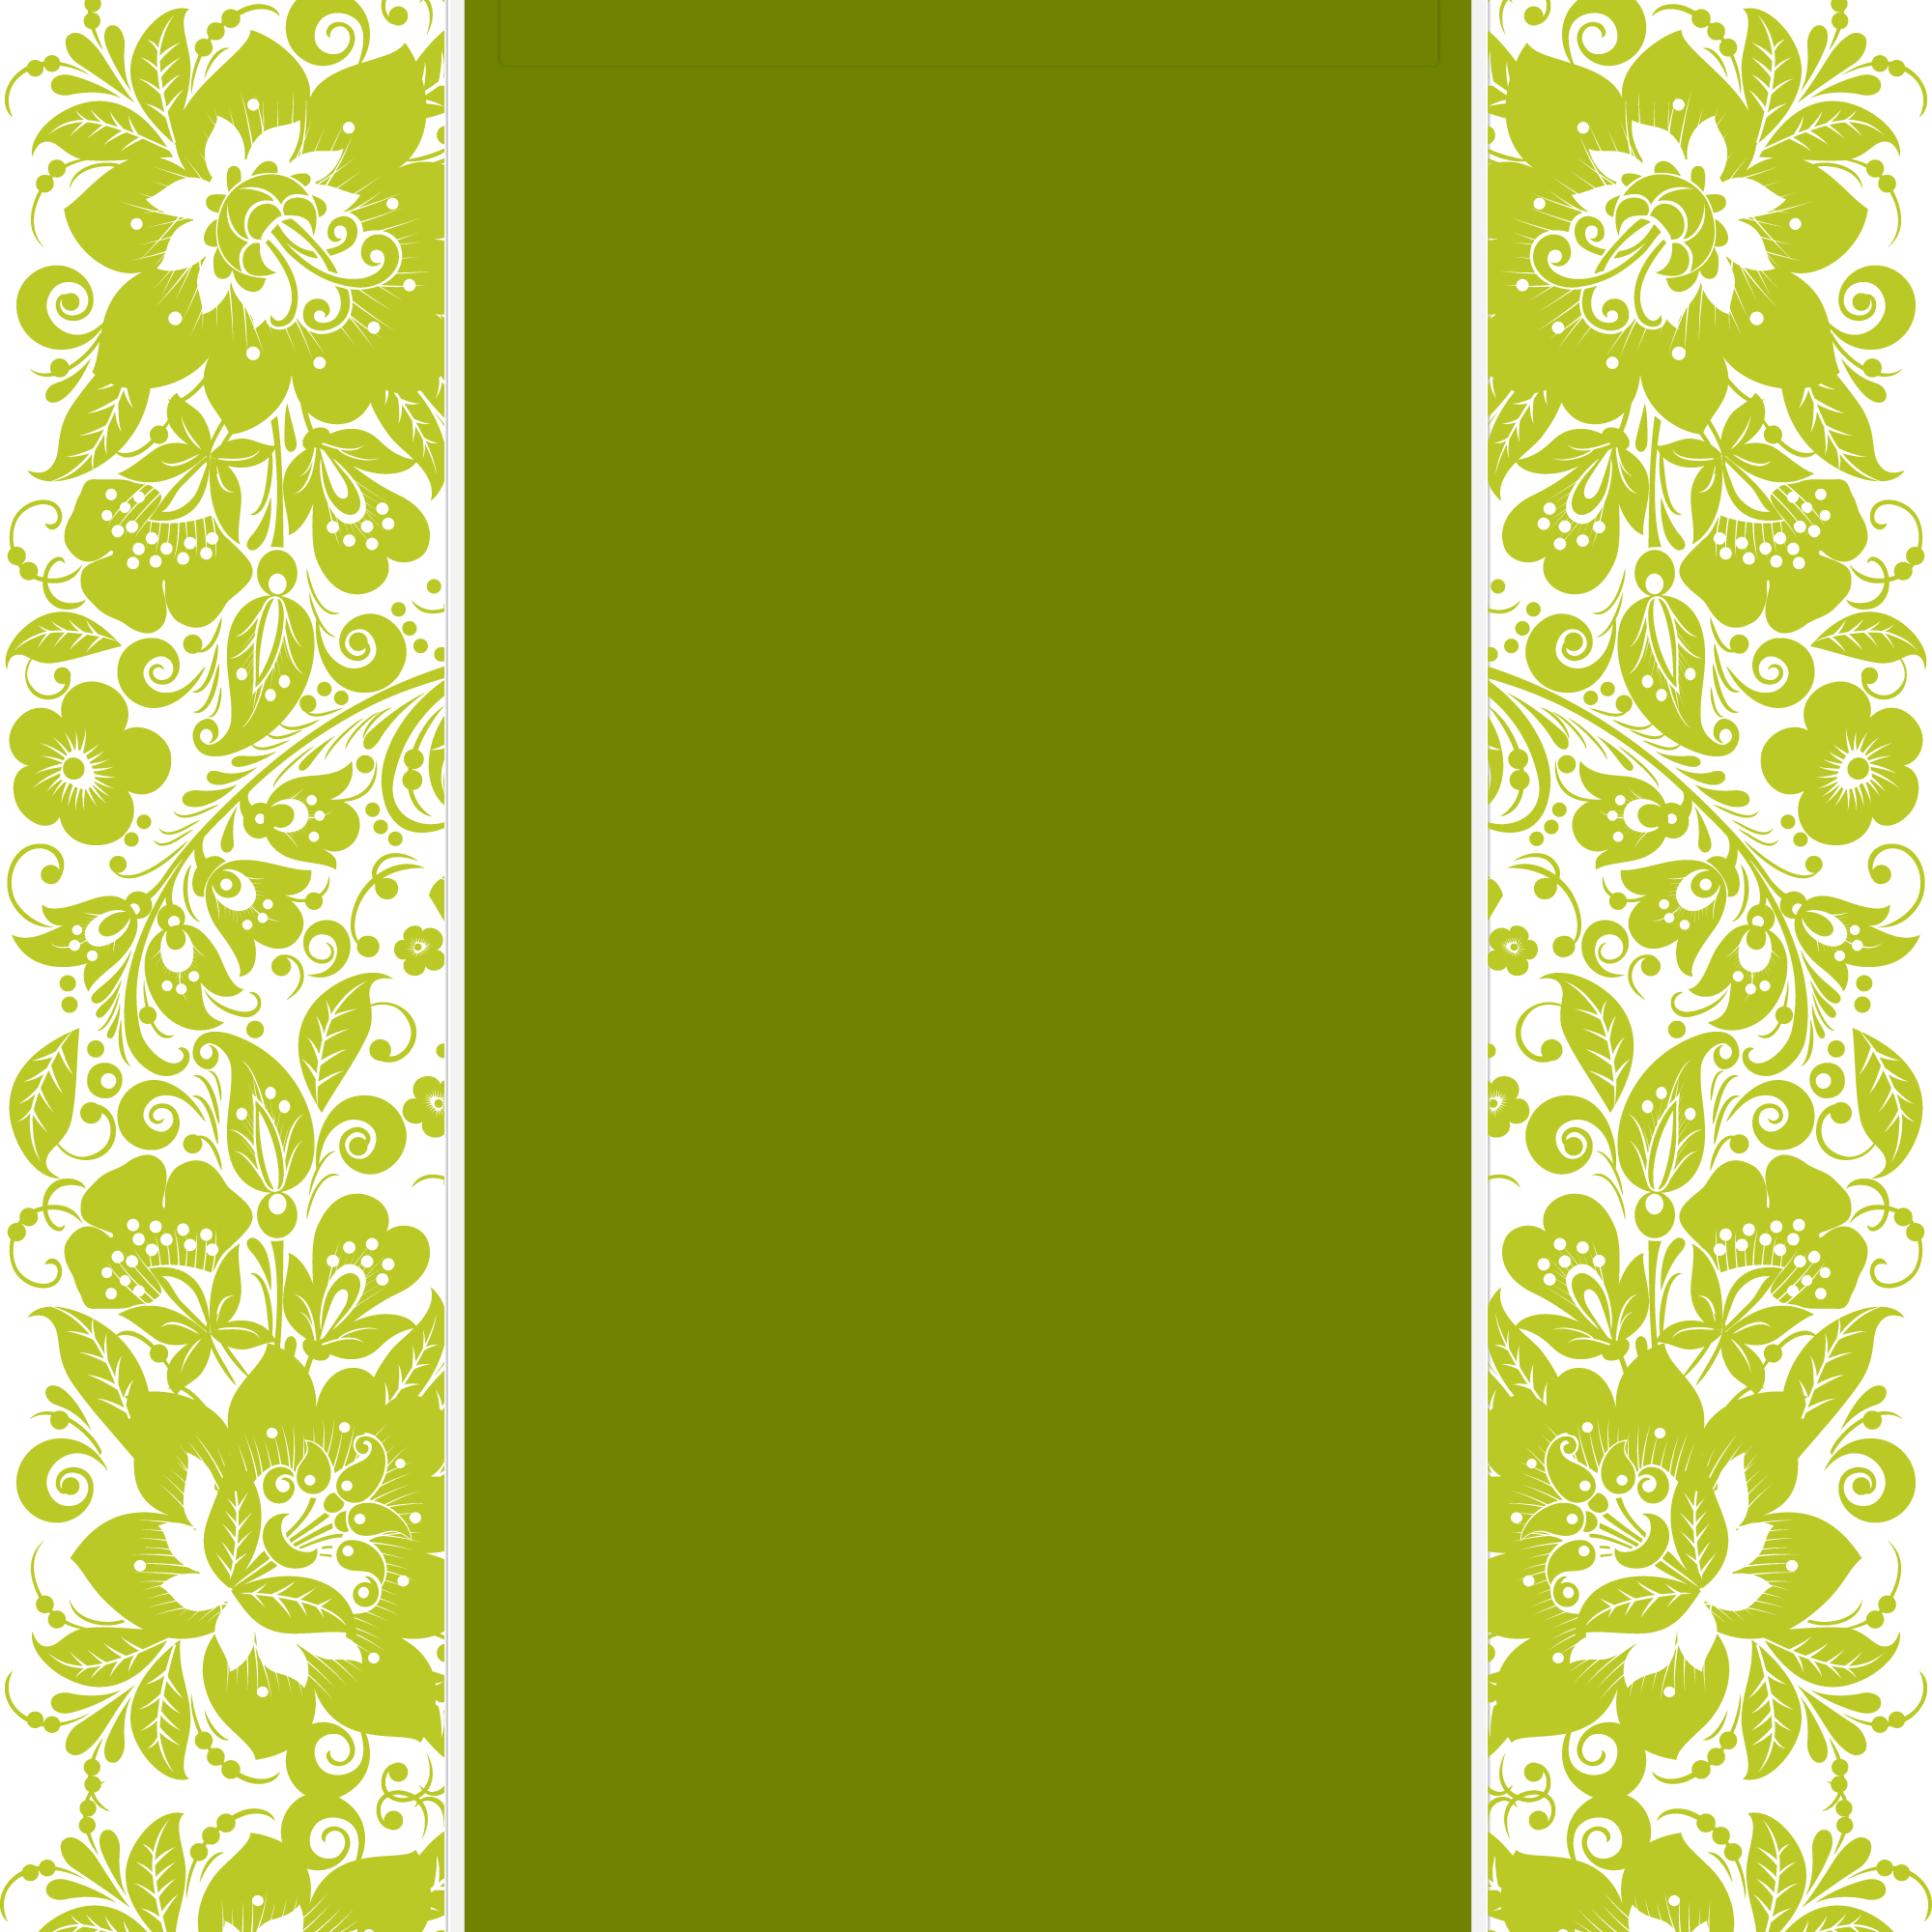 Image Of Pink And Green Banner Border